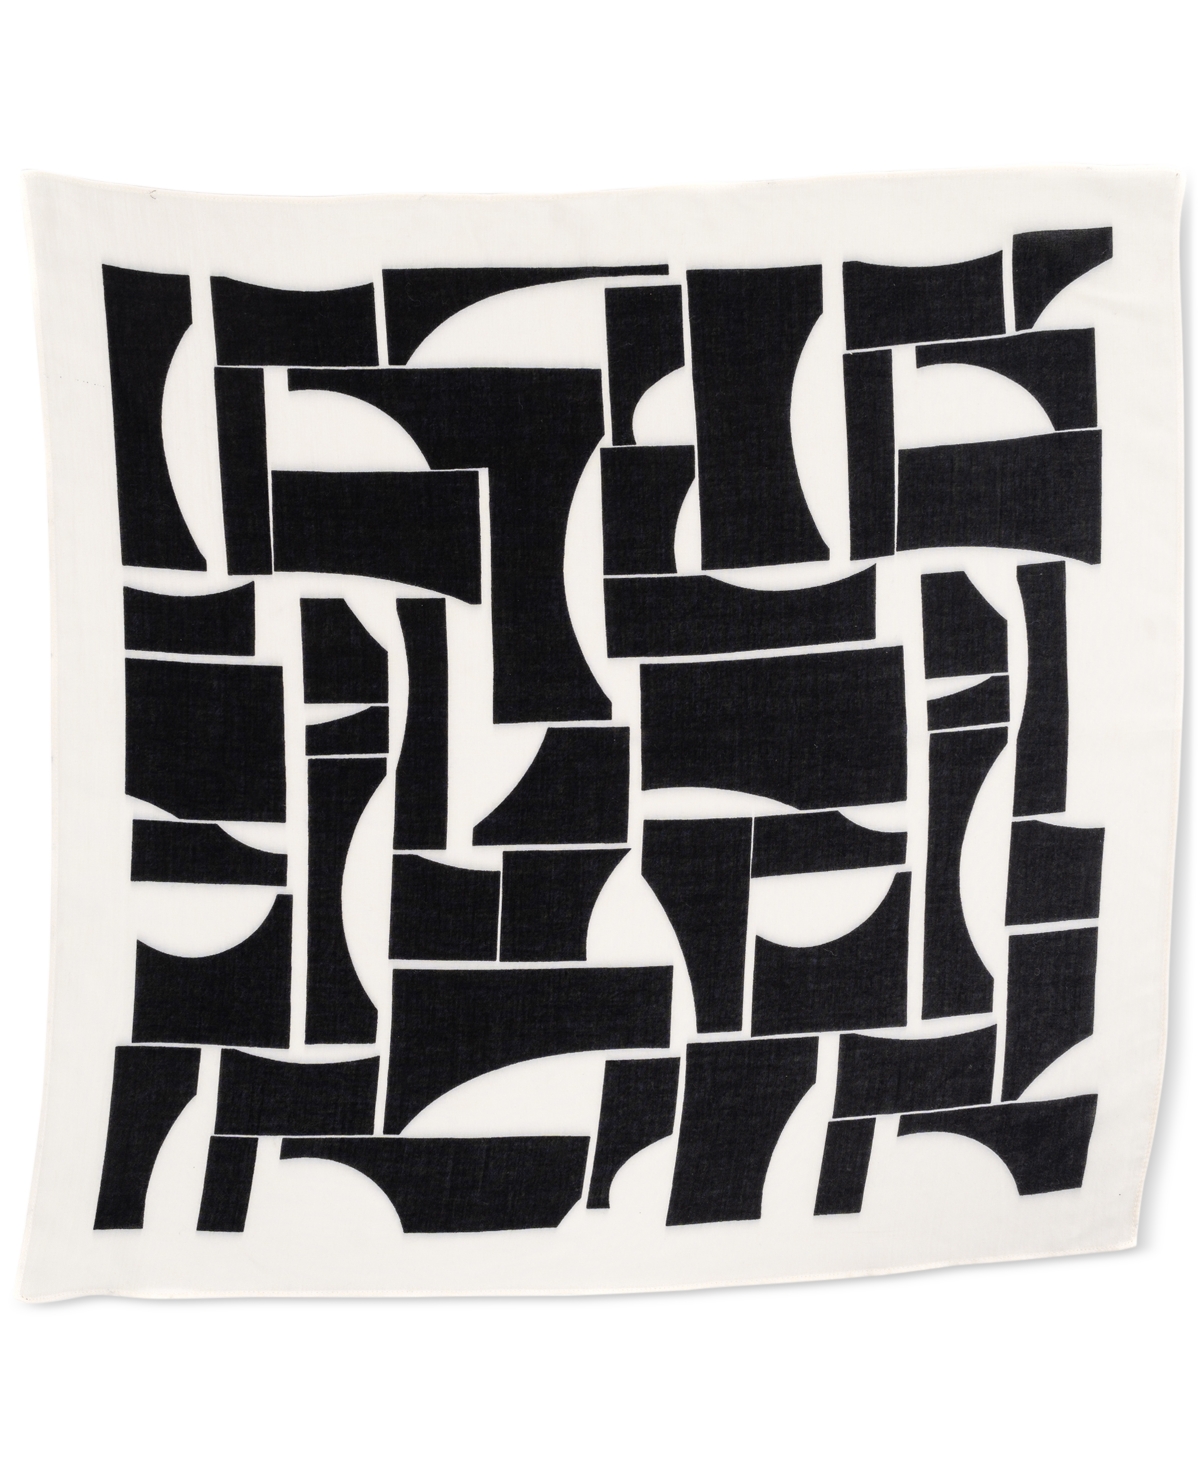 On 34th Women's Abstract Geo Square Scarf, Created For Macy's In Black White